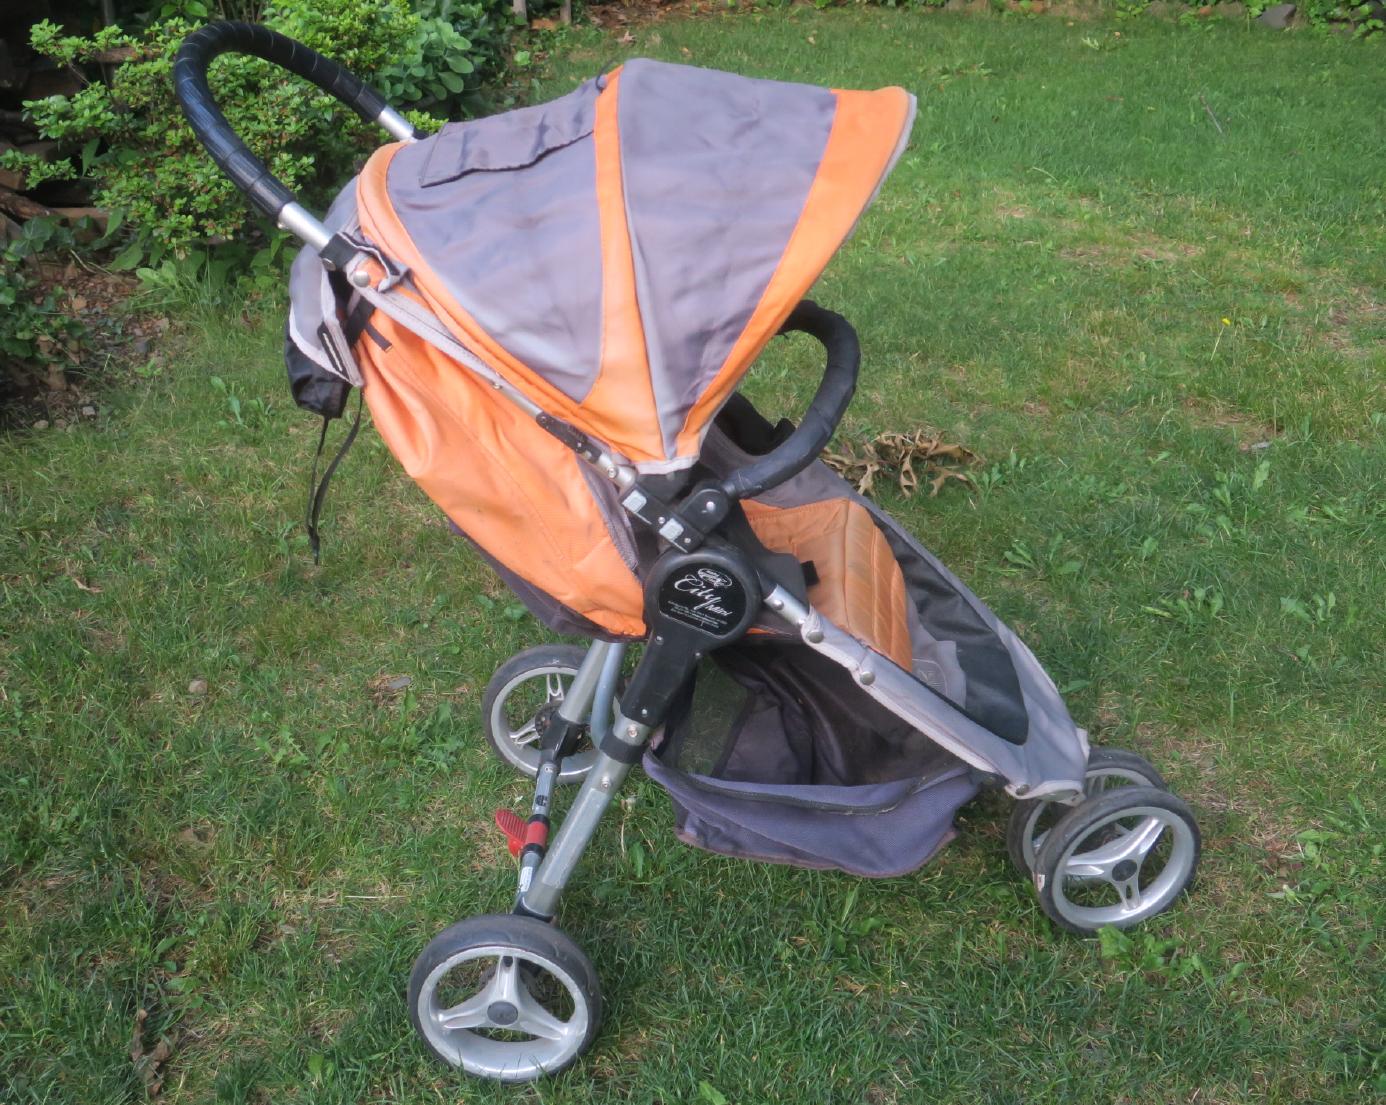 Baby Jogger Strollers